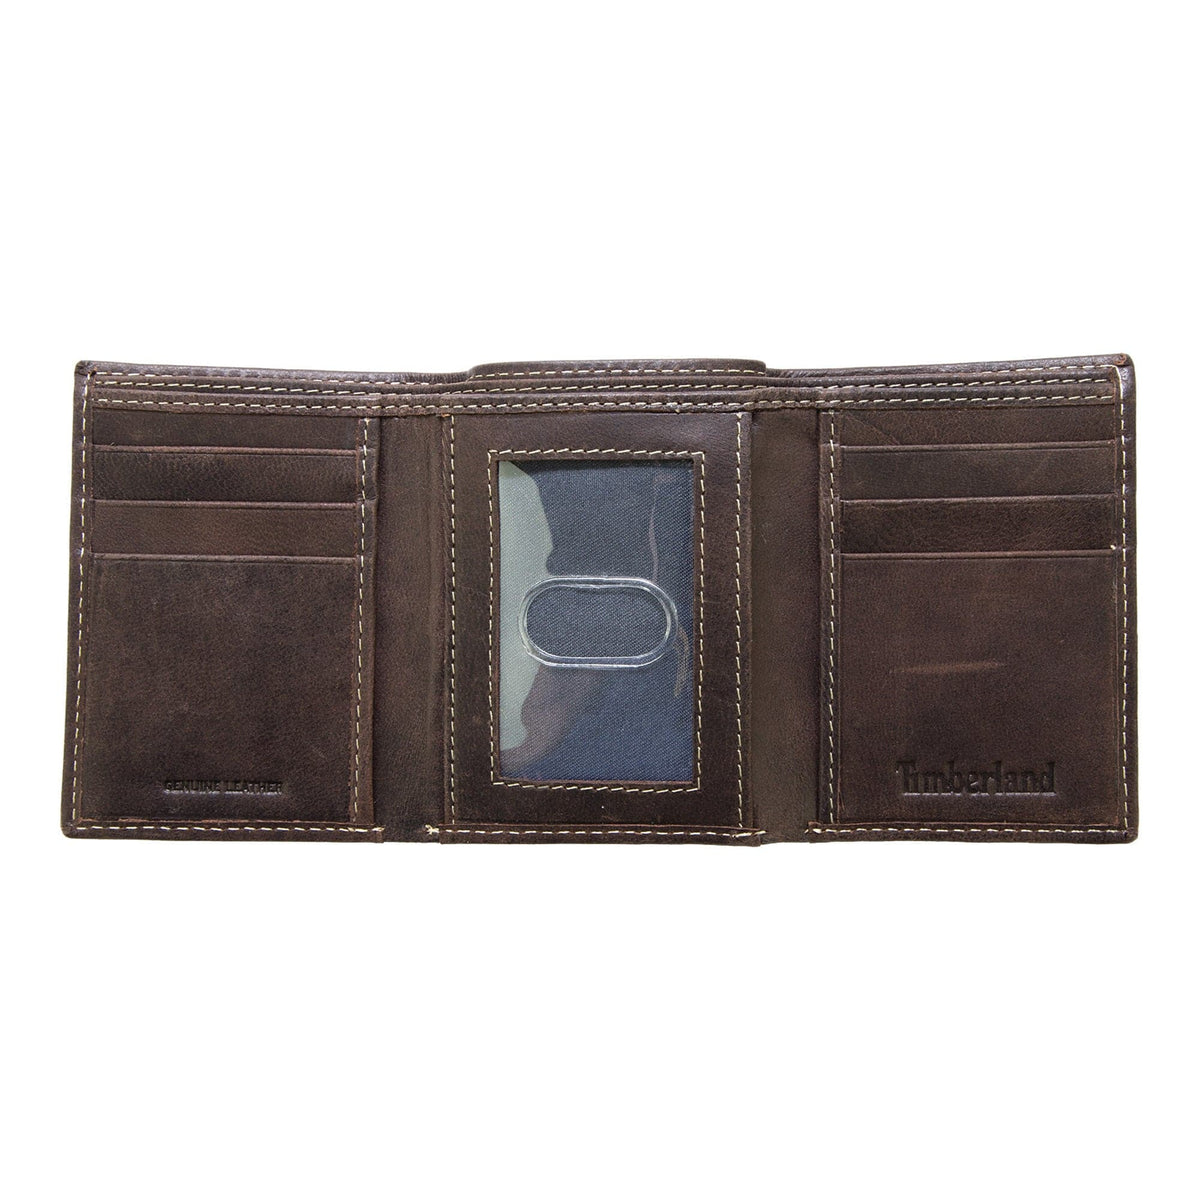 Timberland Cloudy Trifold Wallet